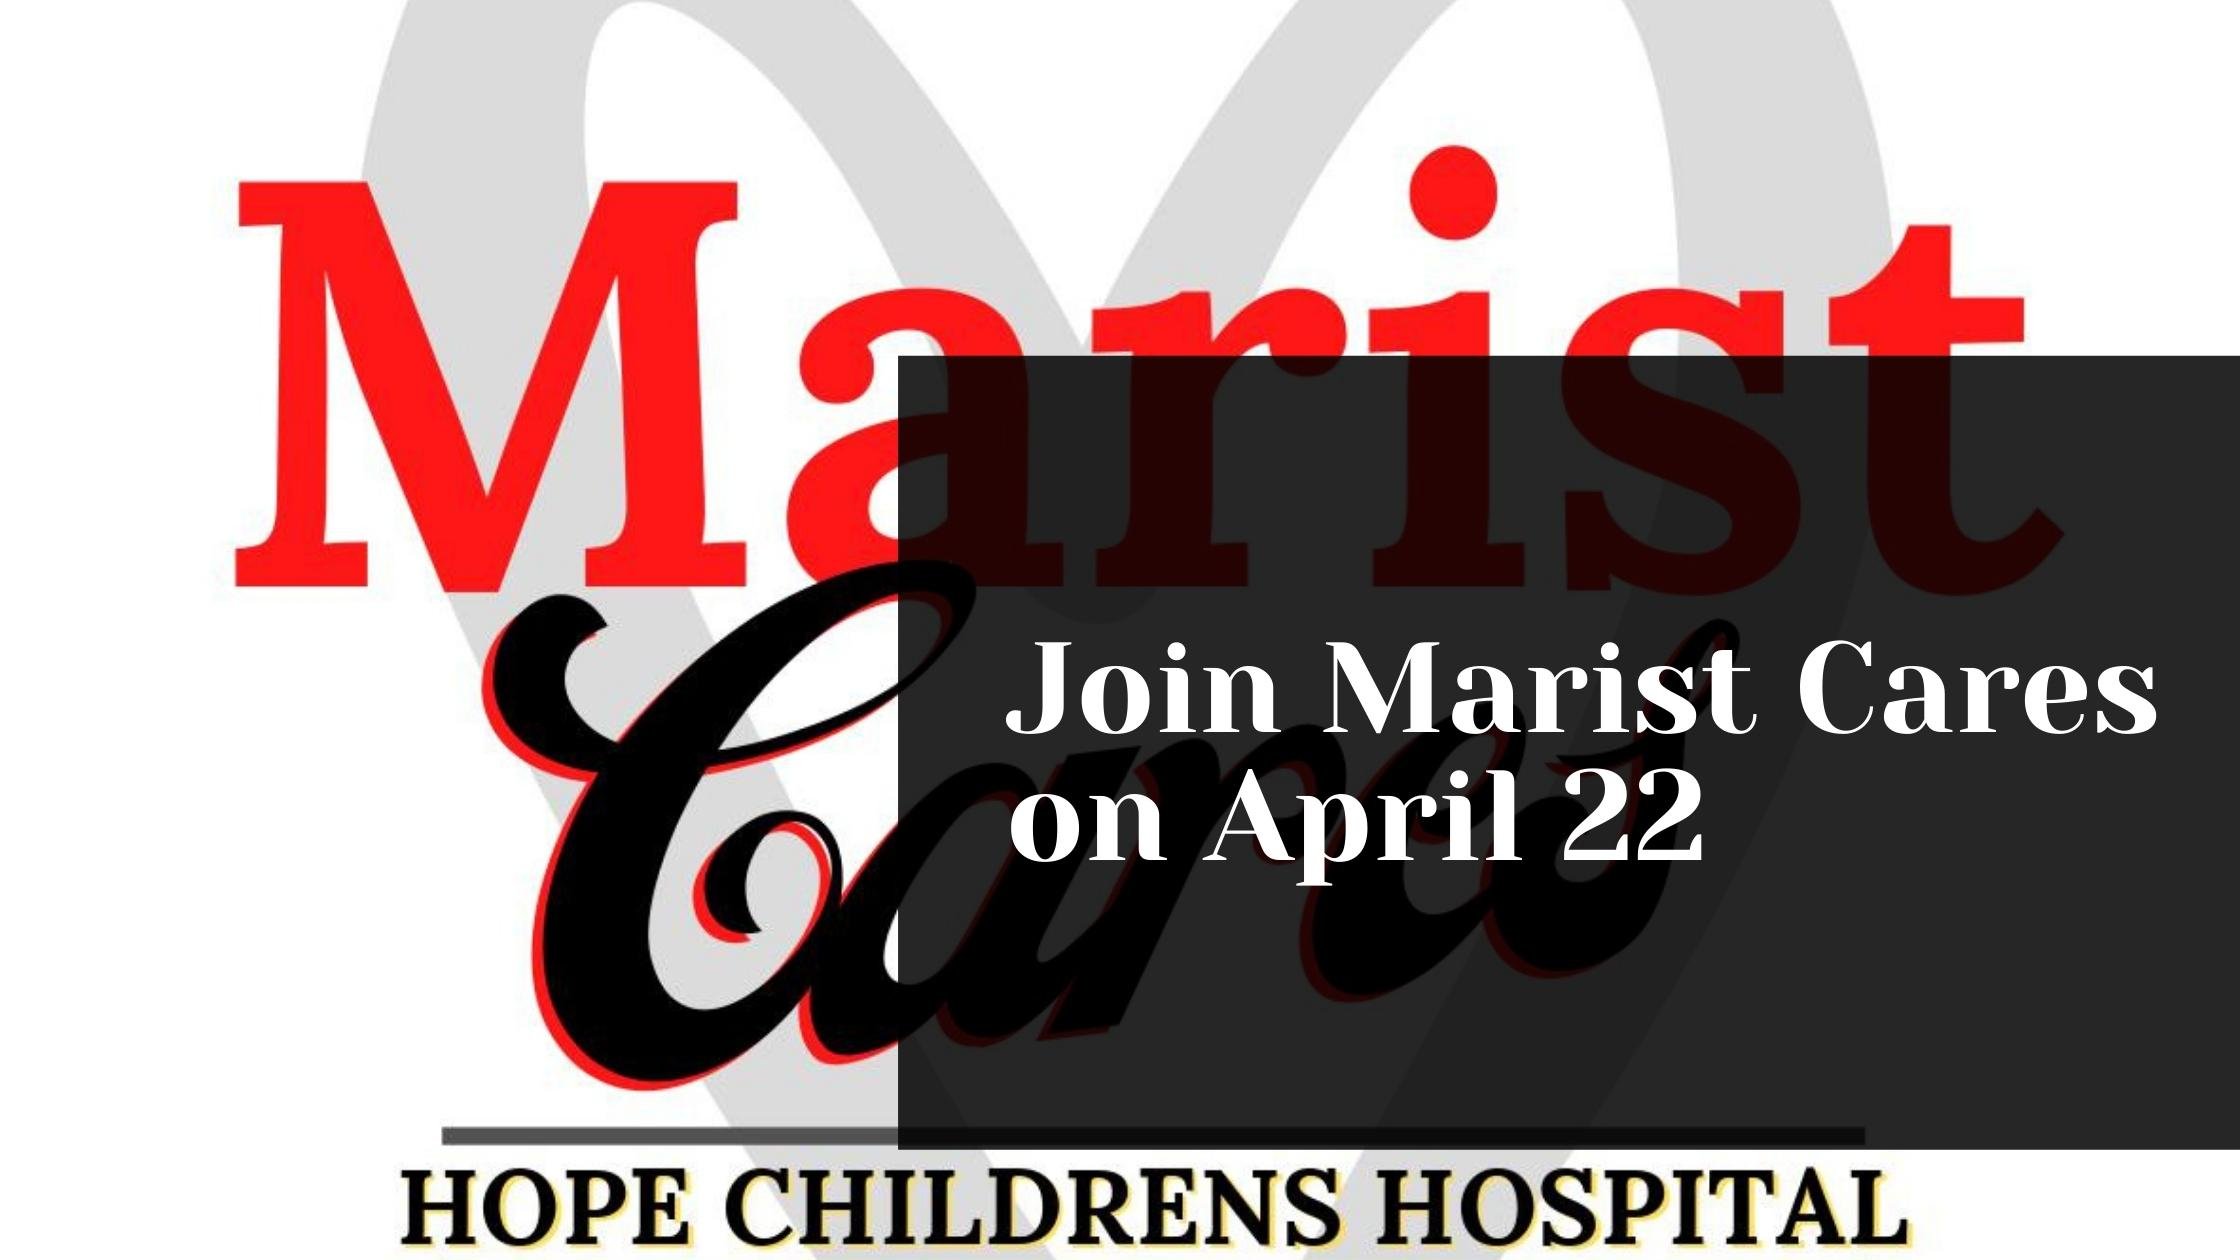 Join Marist Cares on April 22